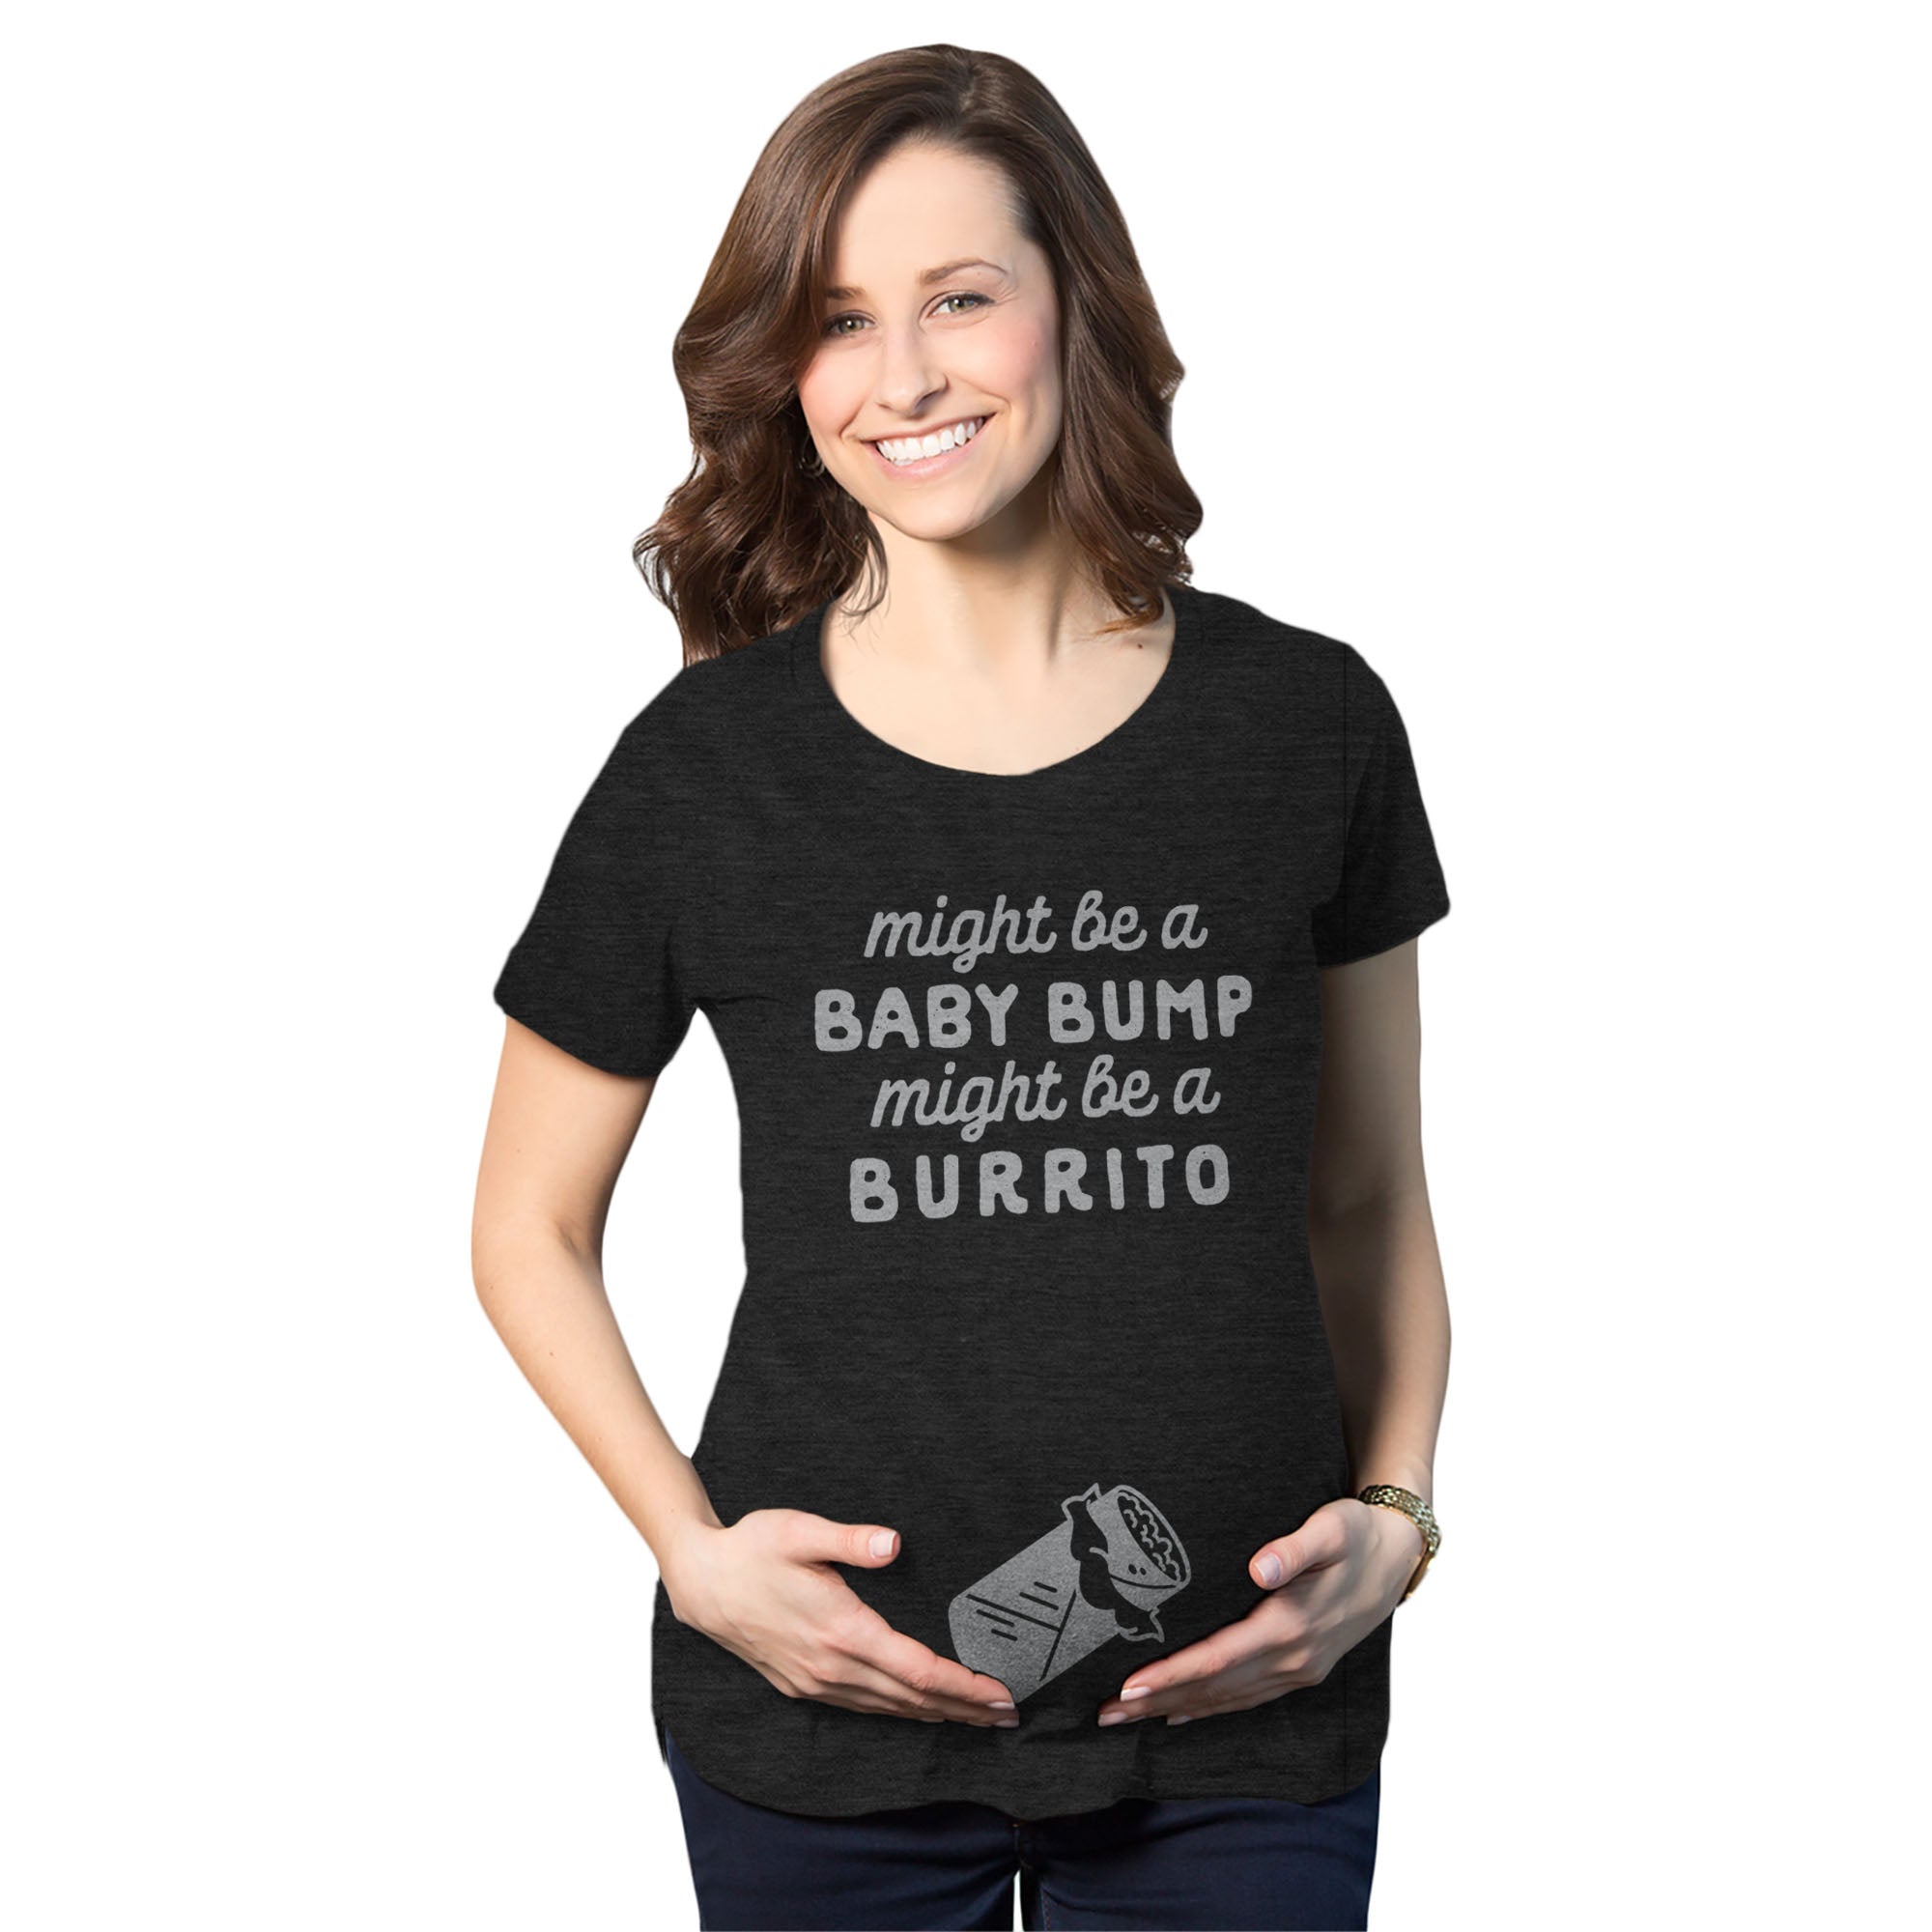 Funny Heather Black Might Be A Bump Might Be A Burrito Maternity T Shirt Nerdy cinco de mayo Food Tee